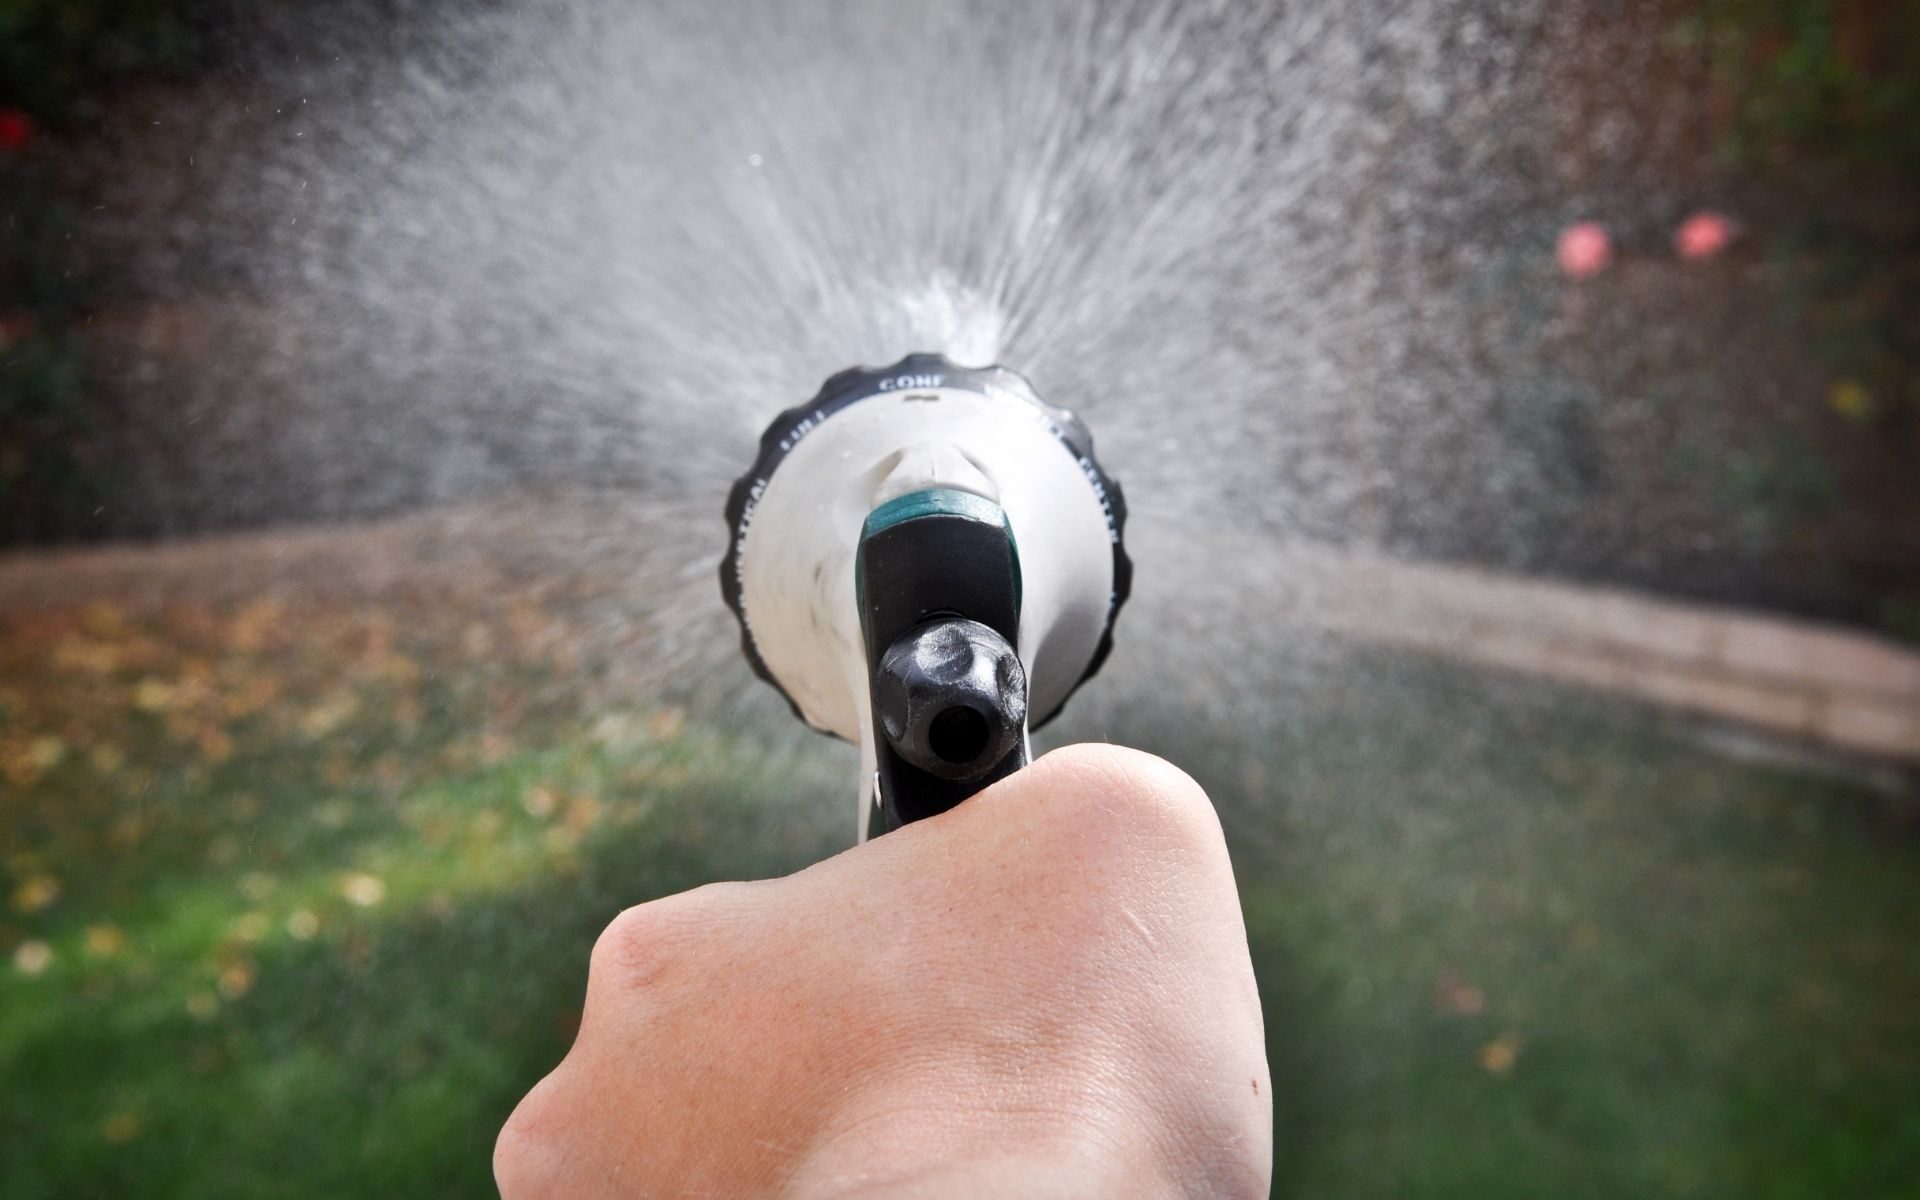 Close-up of a hand holding a garden hose nozzle with water coming out in a spray.